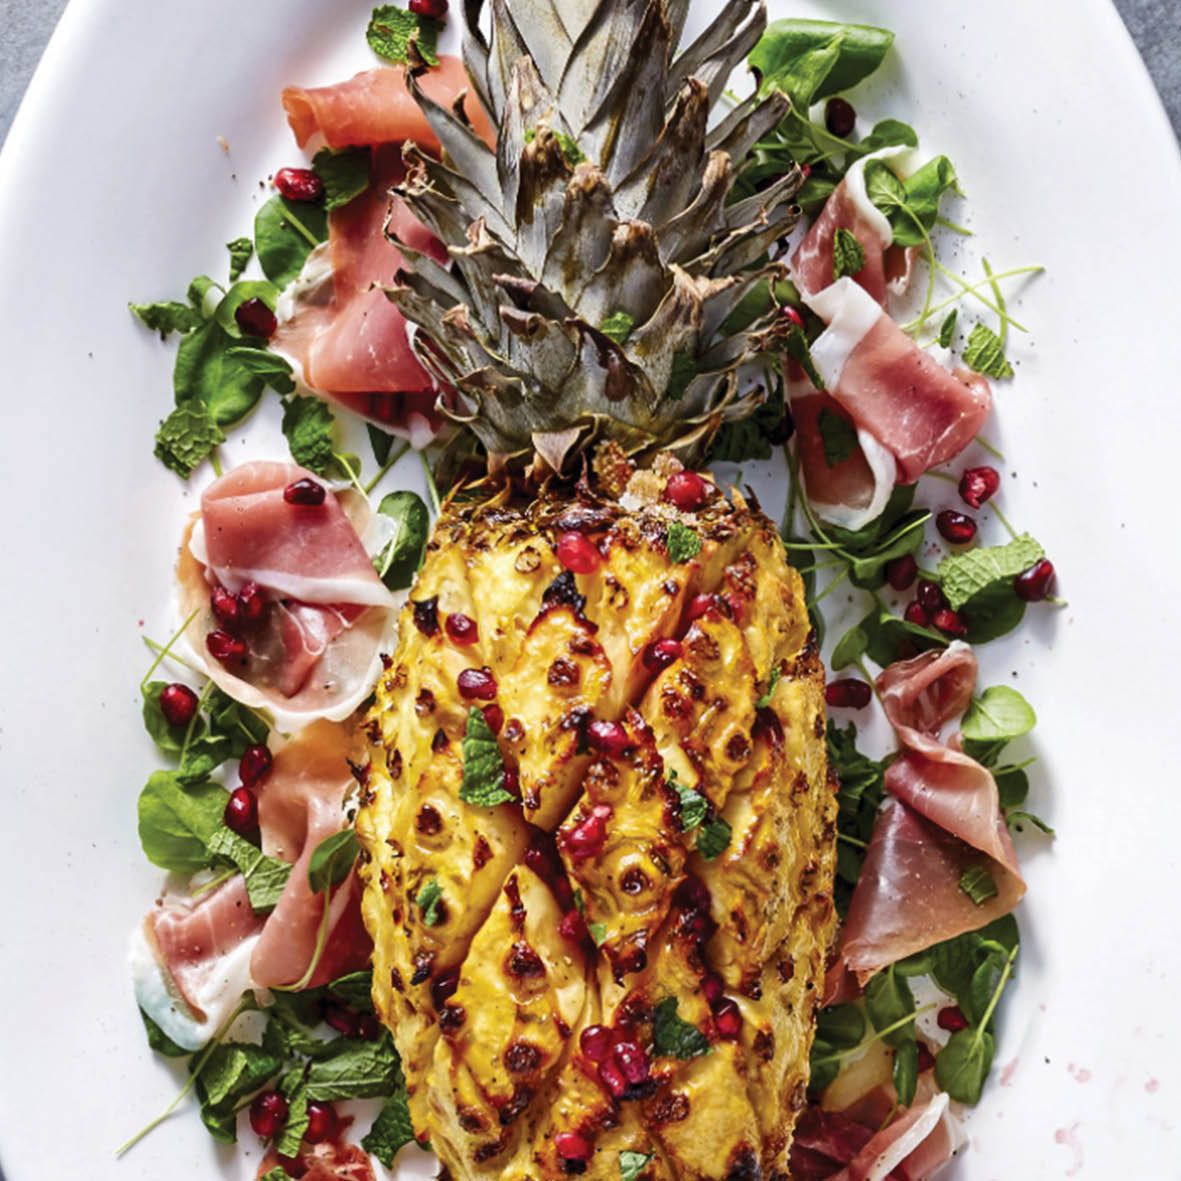 Glazed_Pineapple_with_Prosciutto_and_Pomegranate.jpg